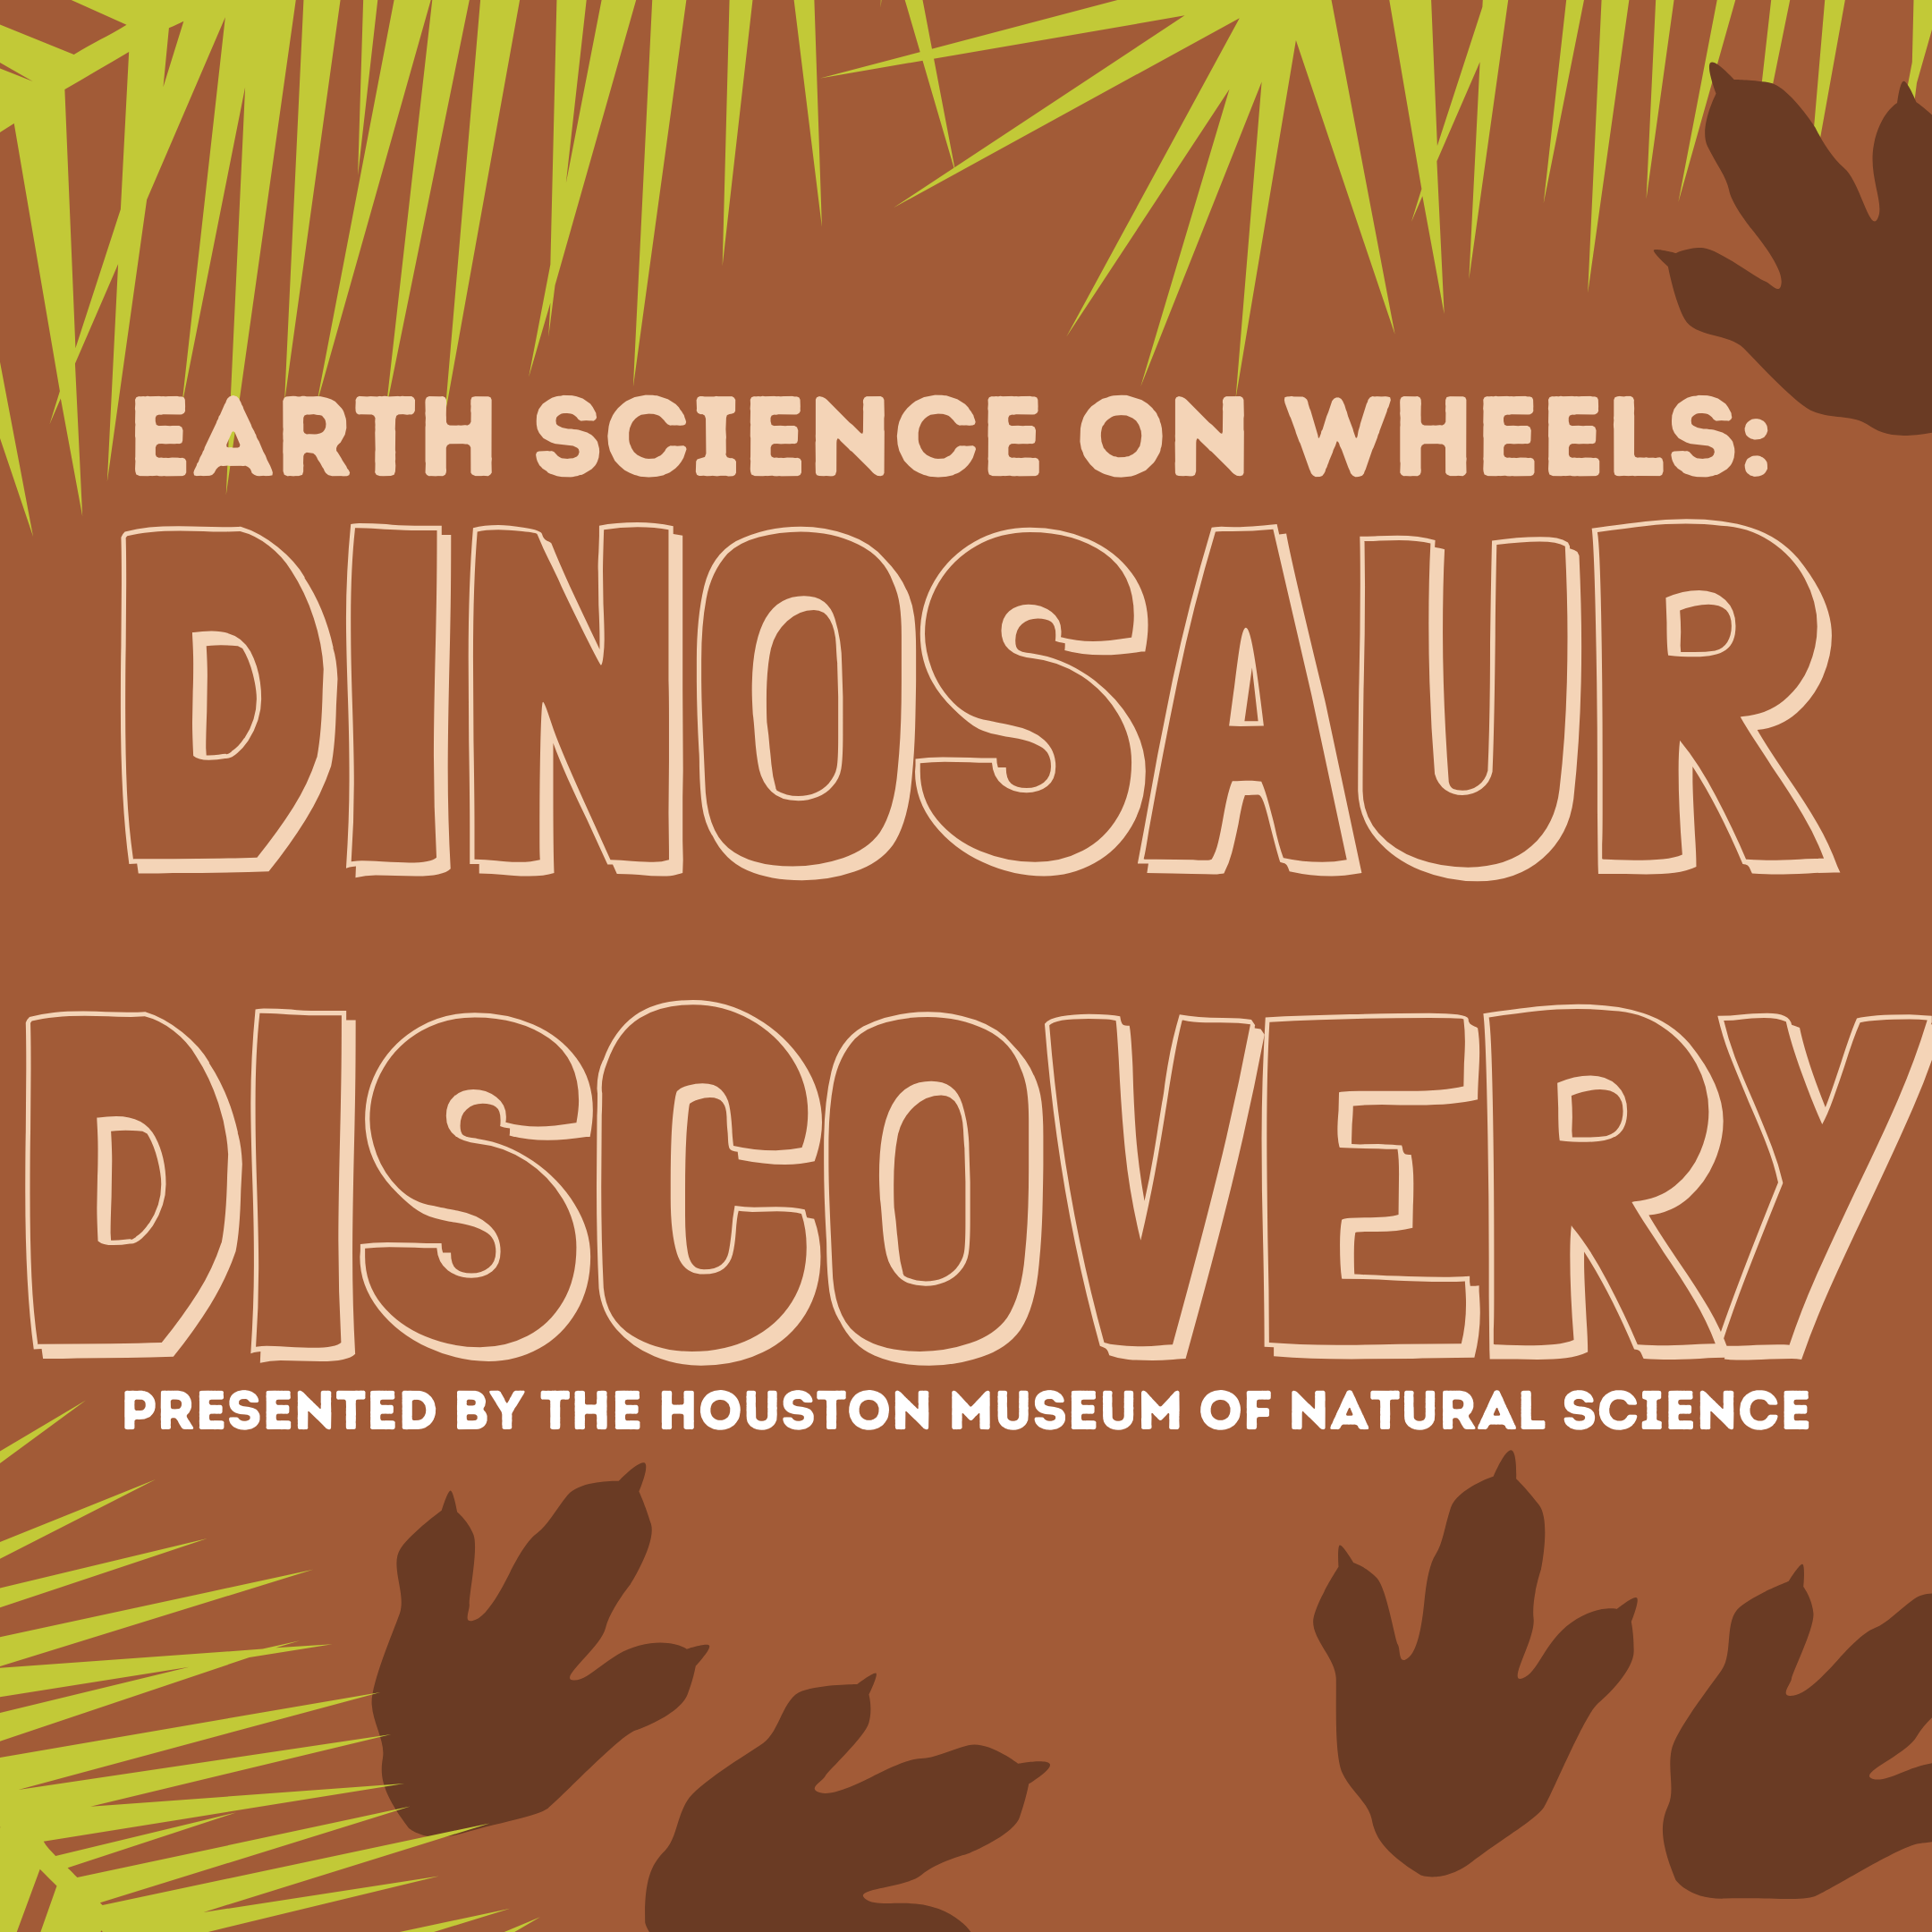 Don't miss Virtual Earth Science On Wheels: Dinosaur Discovery presented by the Houston Museum of Natural Science